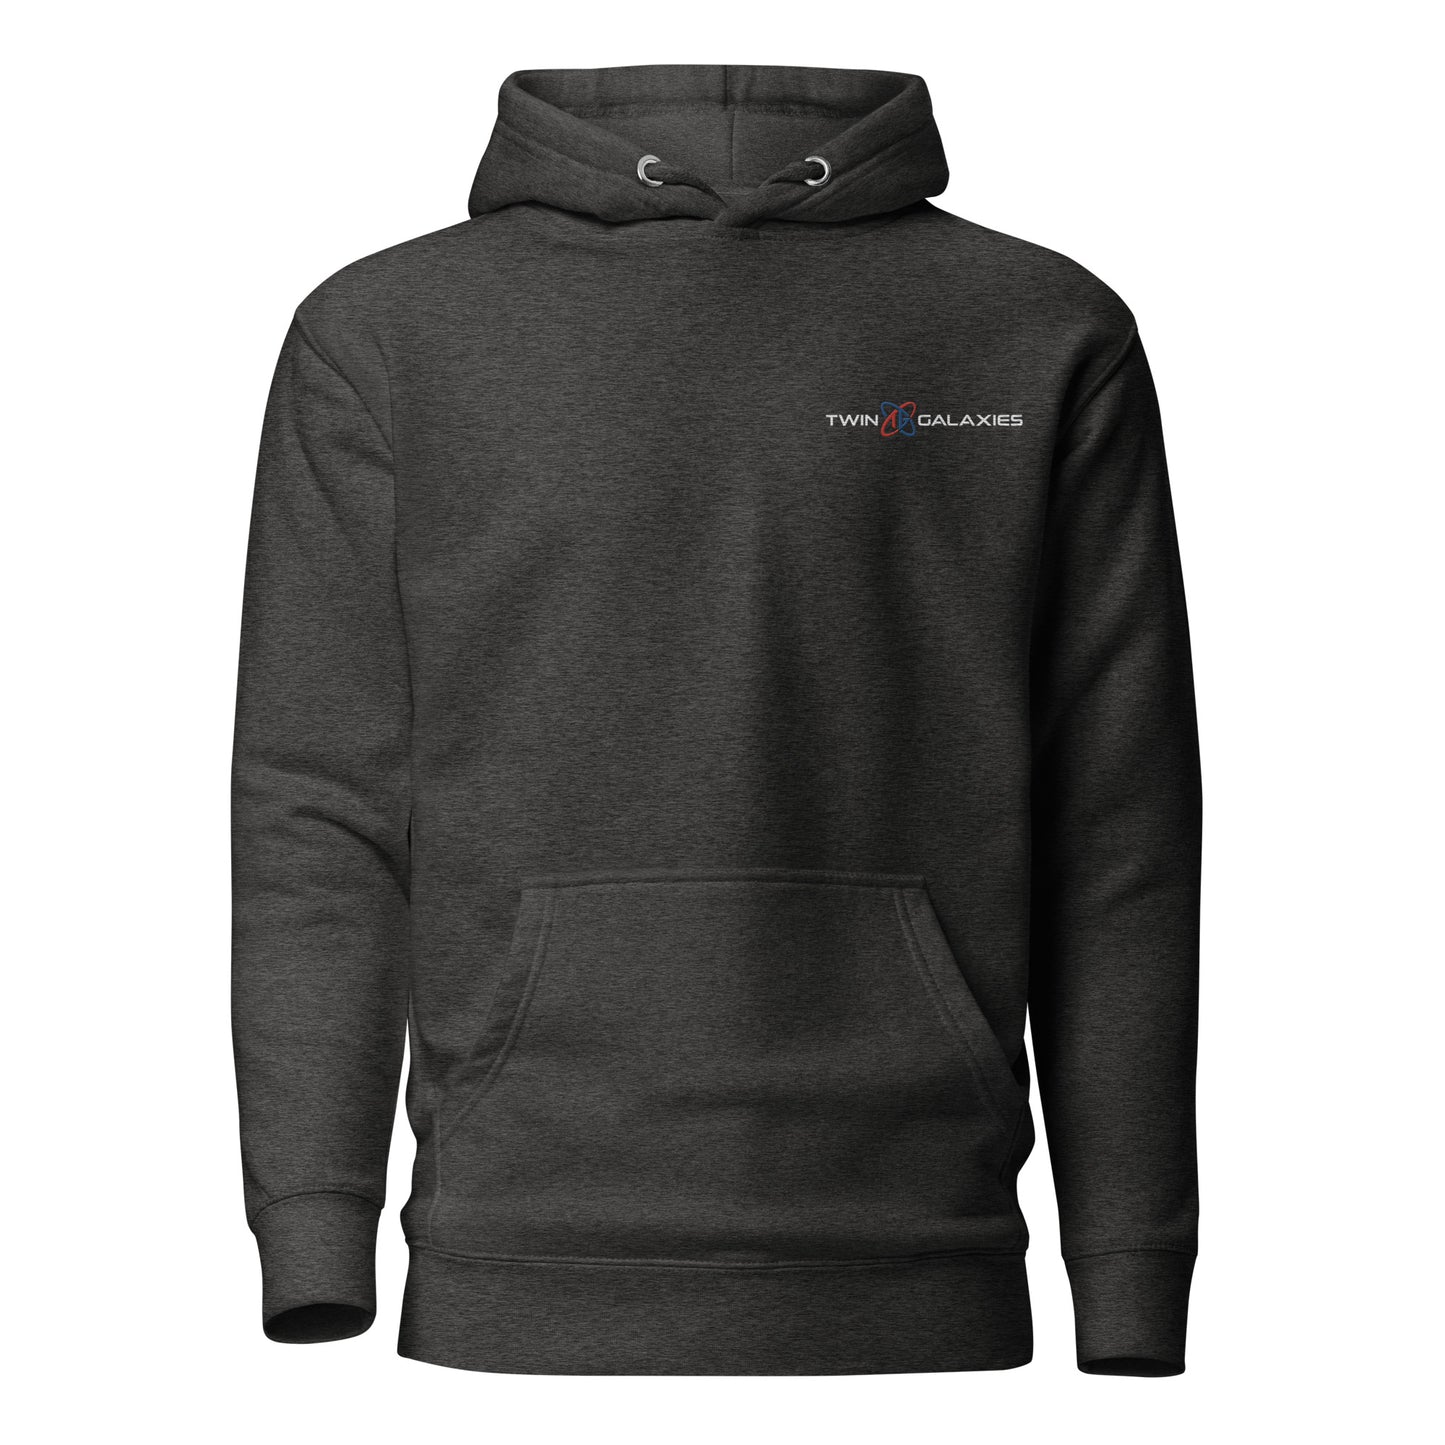 The Official "Classic" Premium Pullover TG HOODIE! - 2024